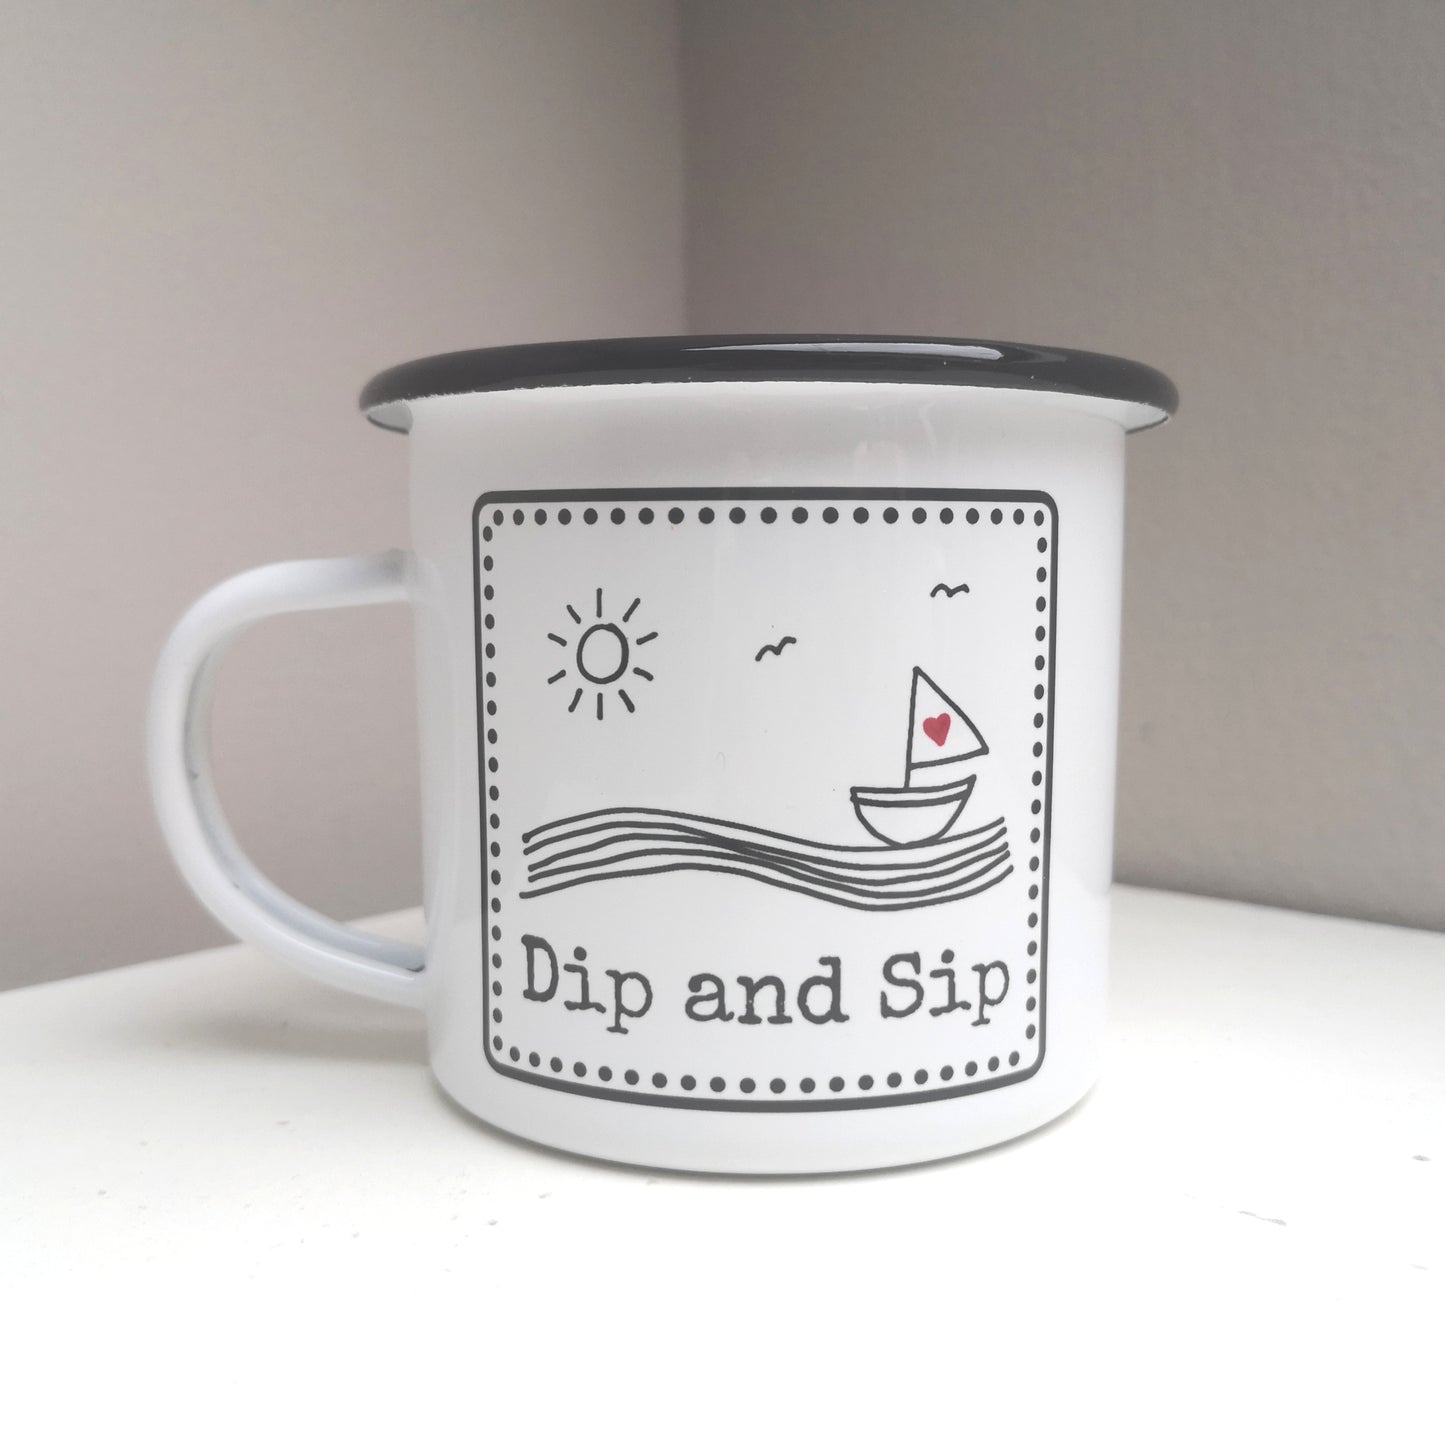 A white steel enamel mug with a year round swimmer's mantra on it - dip and sip.  Photo shows the black and white design with a sailboat